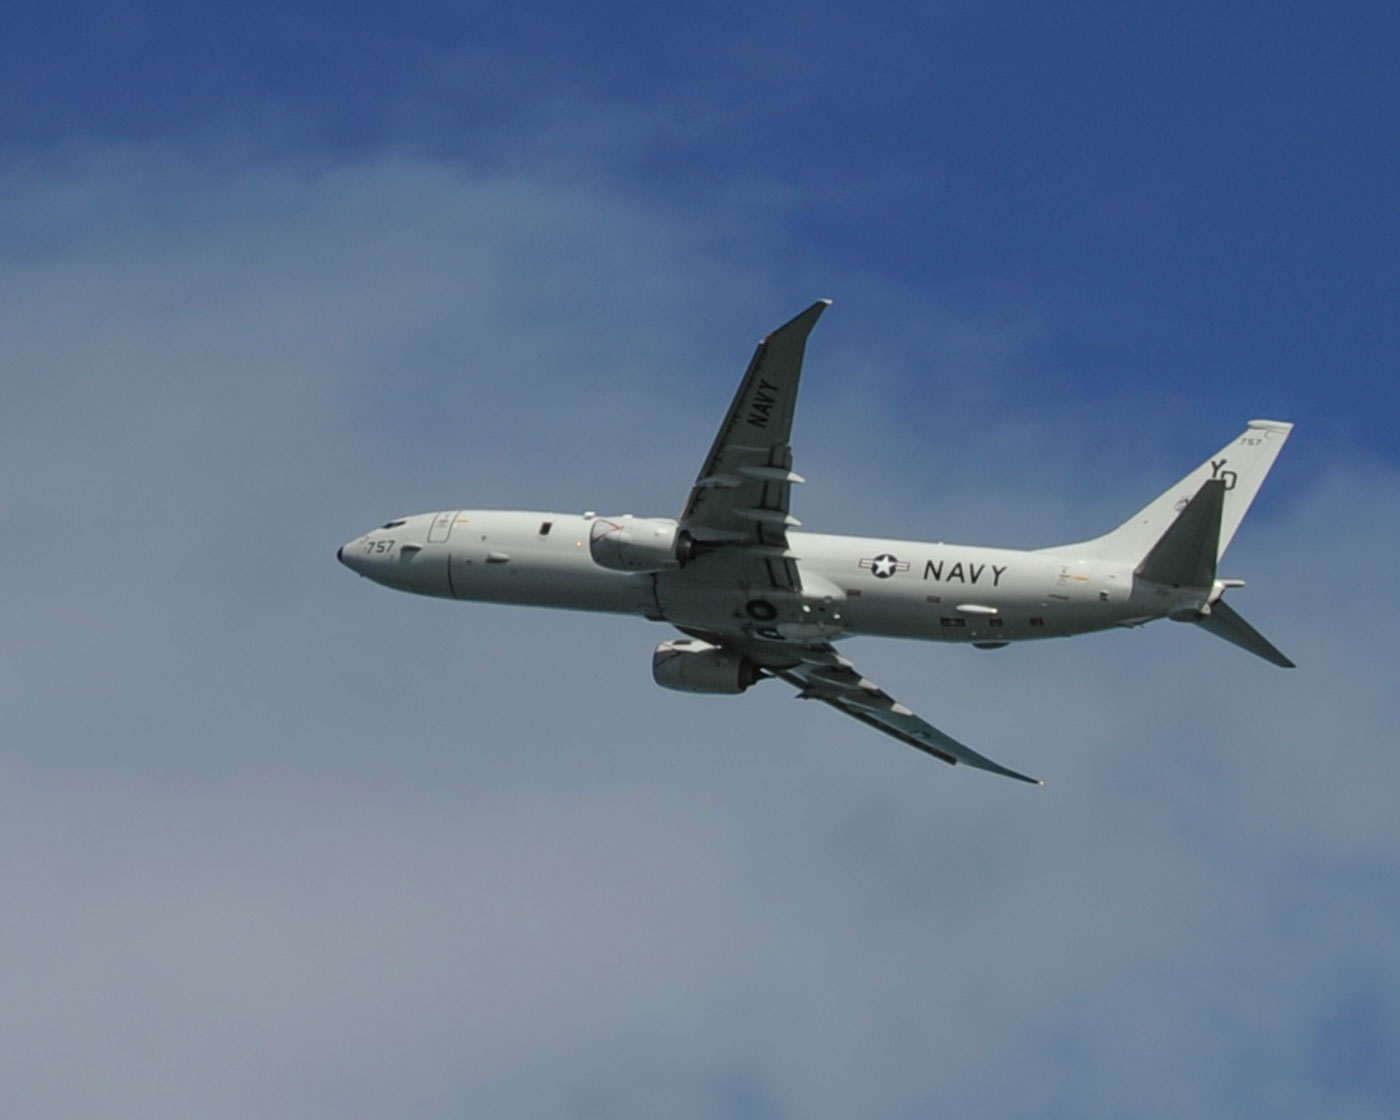 Oak Harbor , Washington (April 2, 2018) A P-8A Poseidon aircraft, assigned to Patrol Squadron (VP) 4, takes off from Naval Air Station Whidbey Island, Wash., to conduct a scheduled deployment in the U.S. 7th Fleet area of operations. VP-4 is a maritime patrol and reconnaissance squadron assigned to Patrol and Reconnaissance Wing 10 and this occasion marks both VP-4 and Wing 10's first P-8A deployment following VP-4's platform transition from the P-3C Orion to the P-8A Poseidon aircraft between September 2016 to May 2017 -- U.S. Navy photo by MCS 2nd Class Juan S. Sua. -